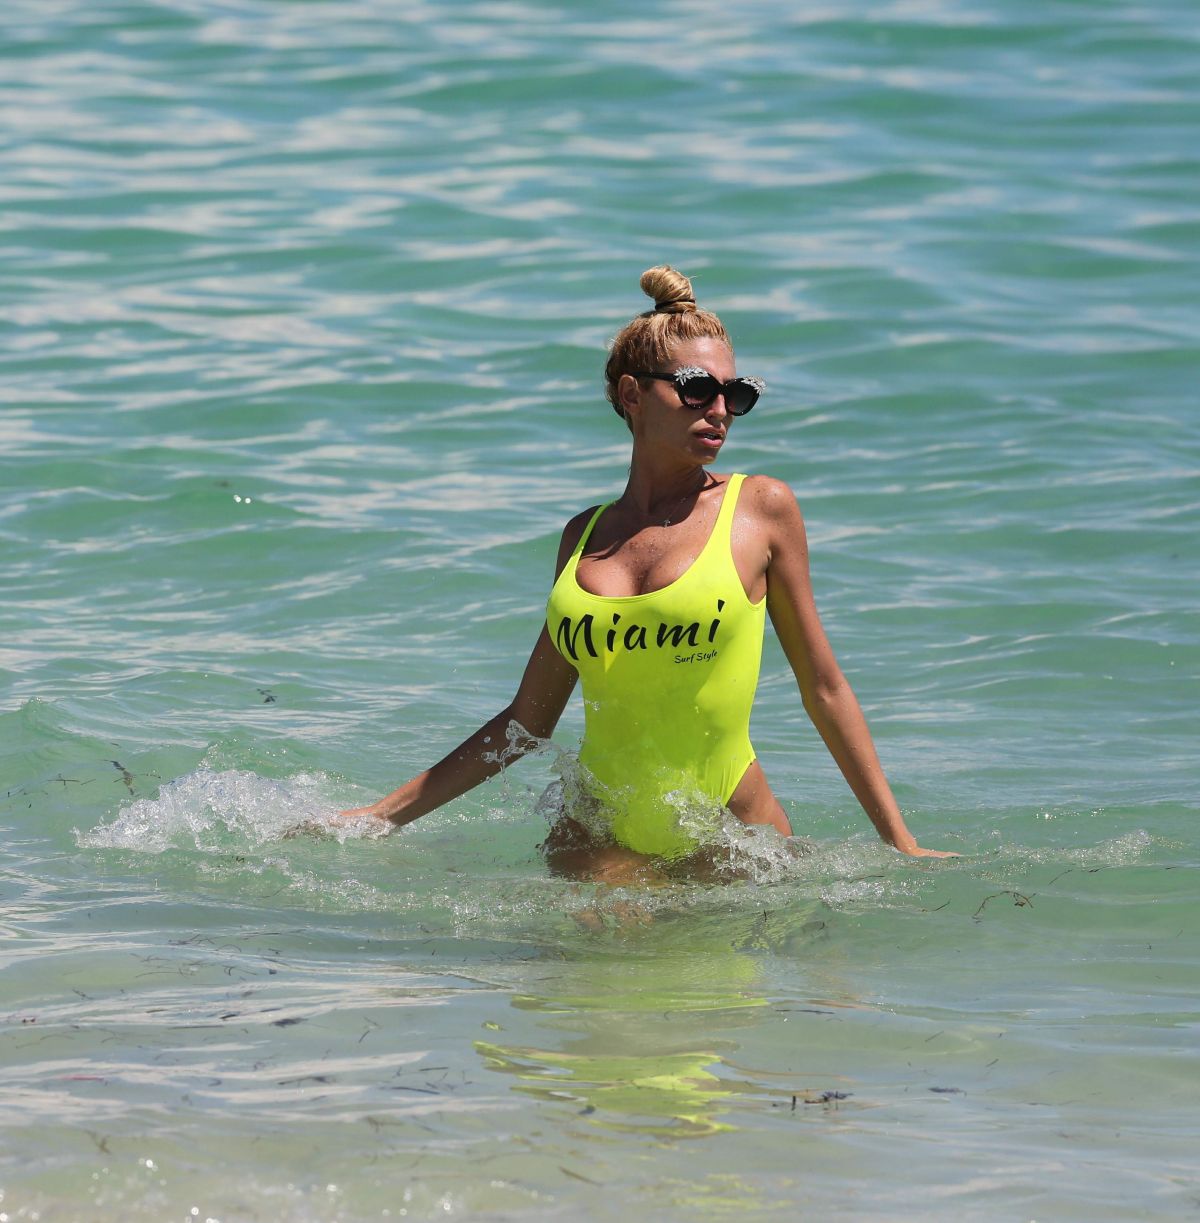 vicky-zipolitakis-in-yellow-swimsuit-at-a-beach-in-miami-09-21-2016_29.jpg